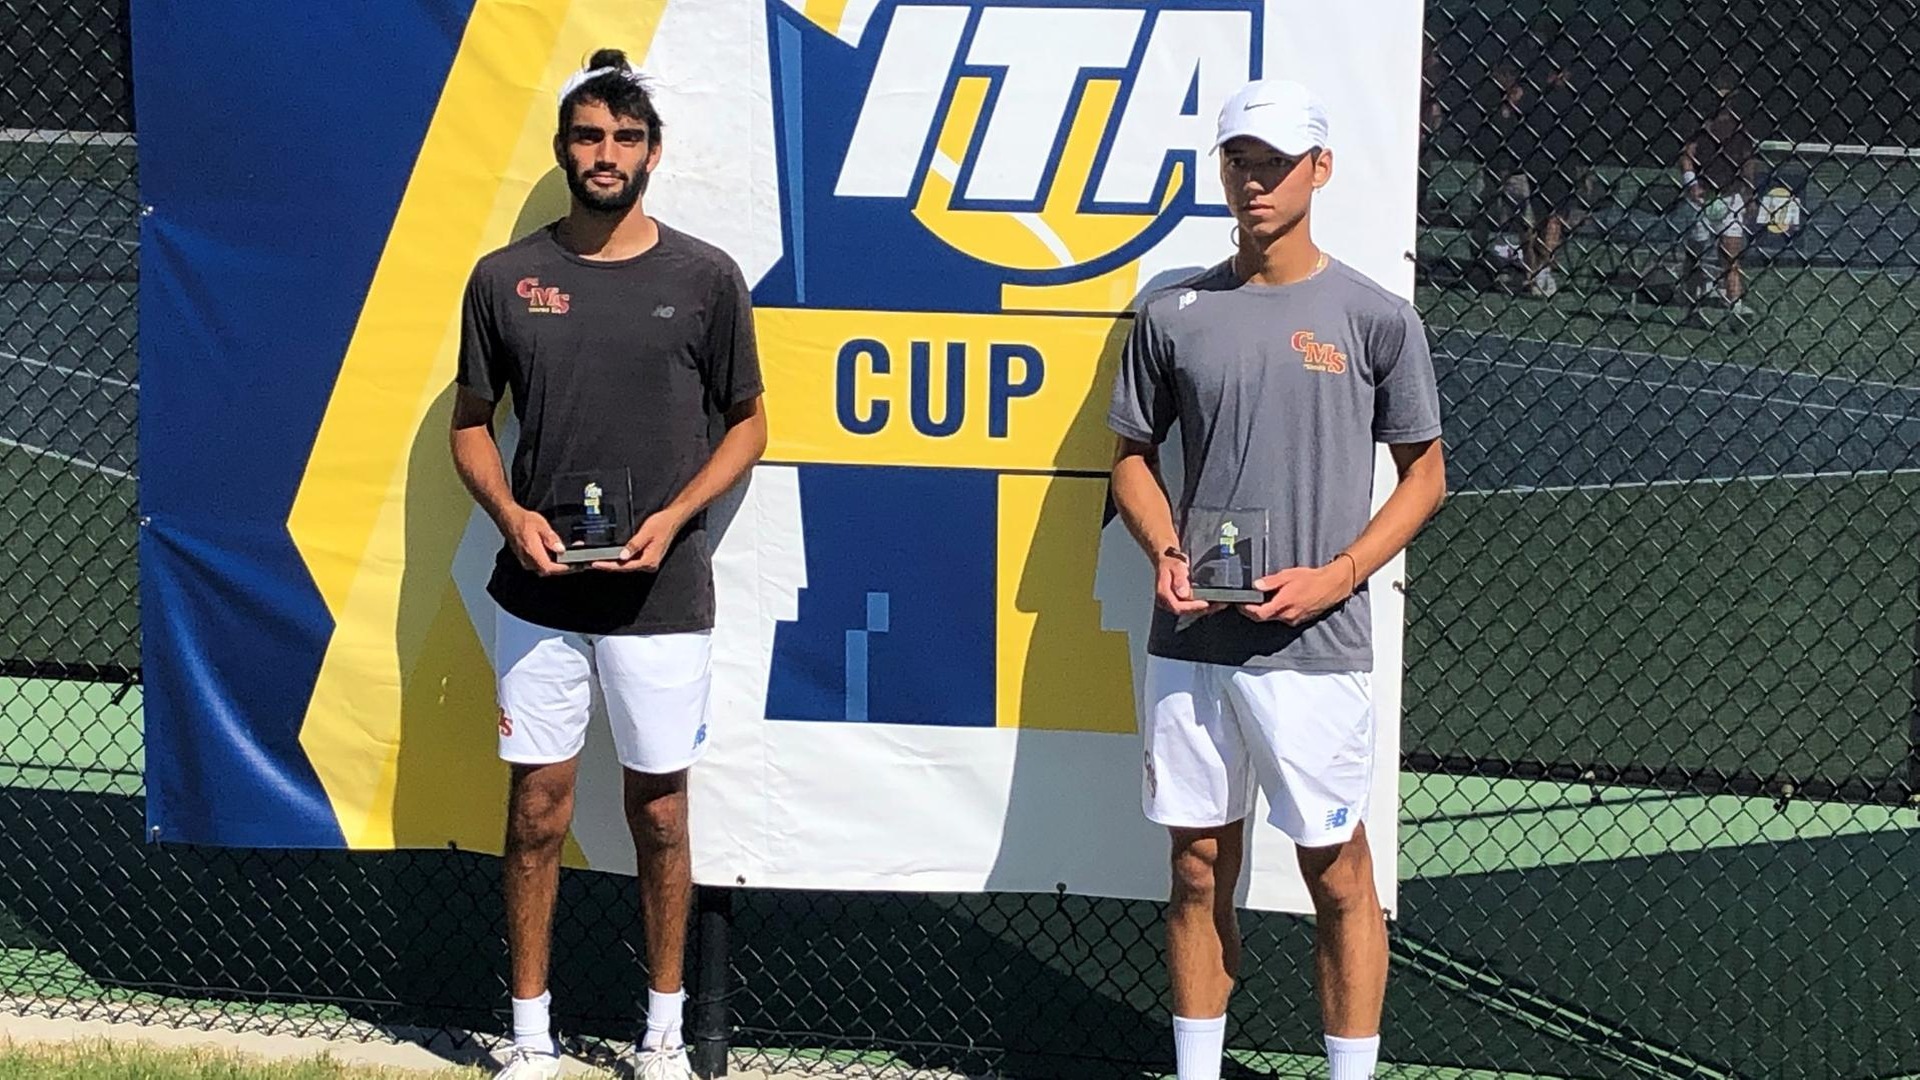 Nathan Arimilli (l) and Philip Martin (r) reached the national finals in their first college event